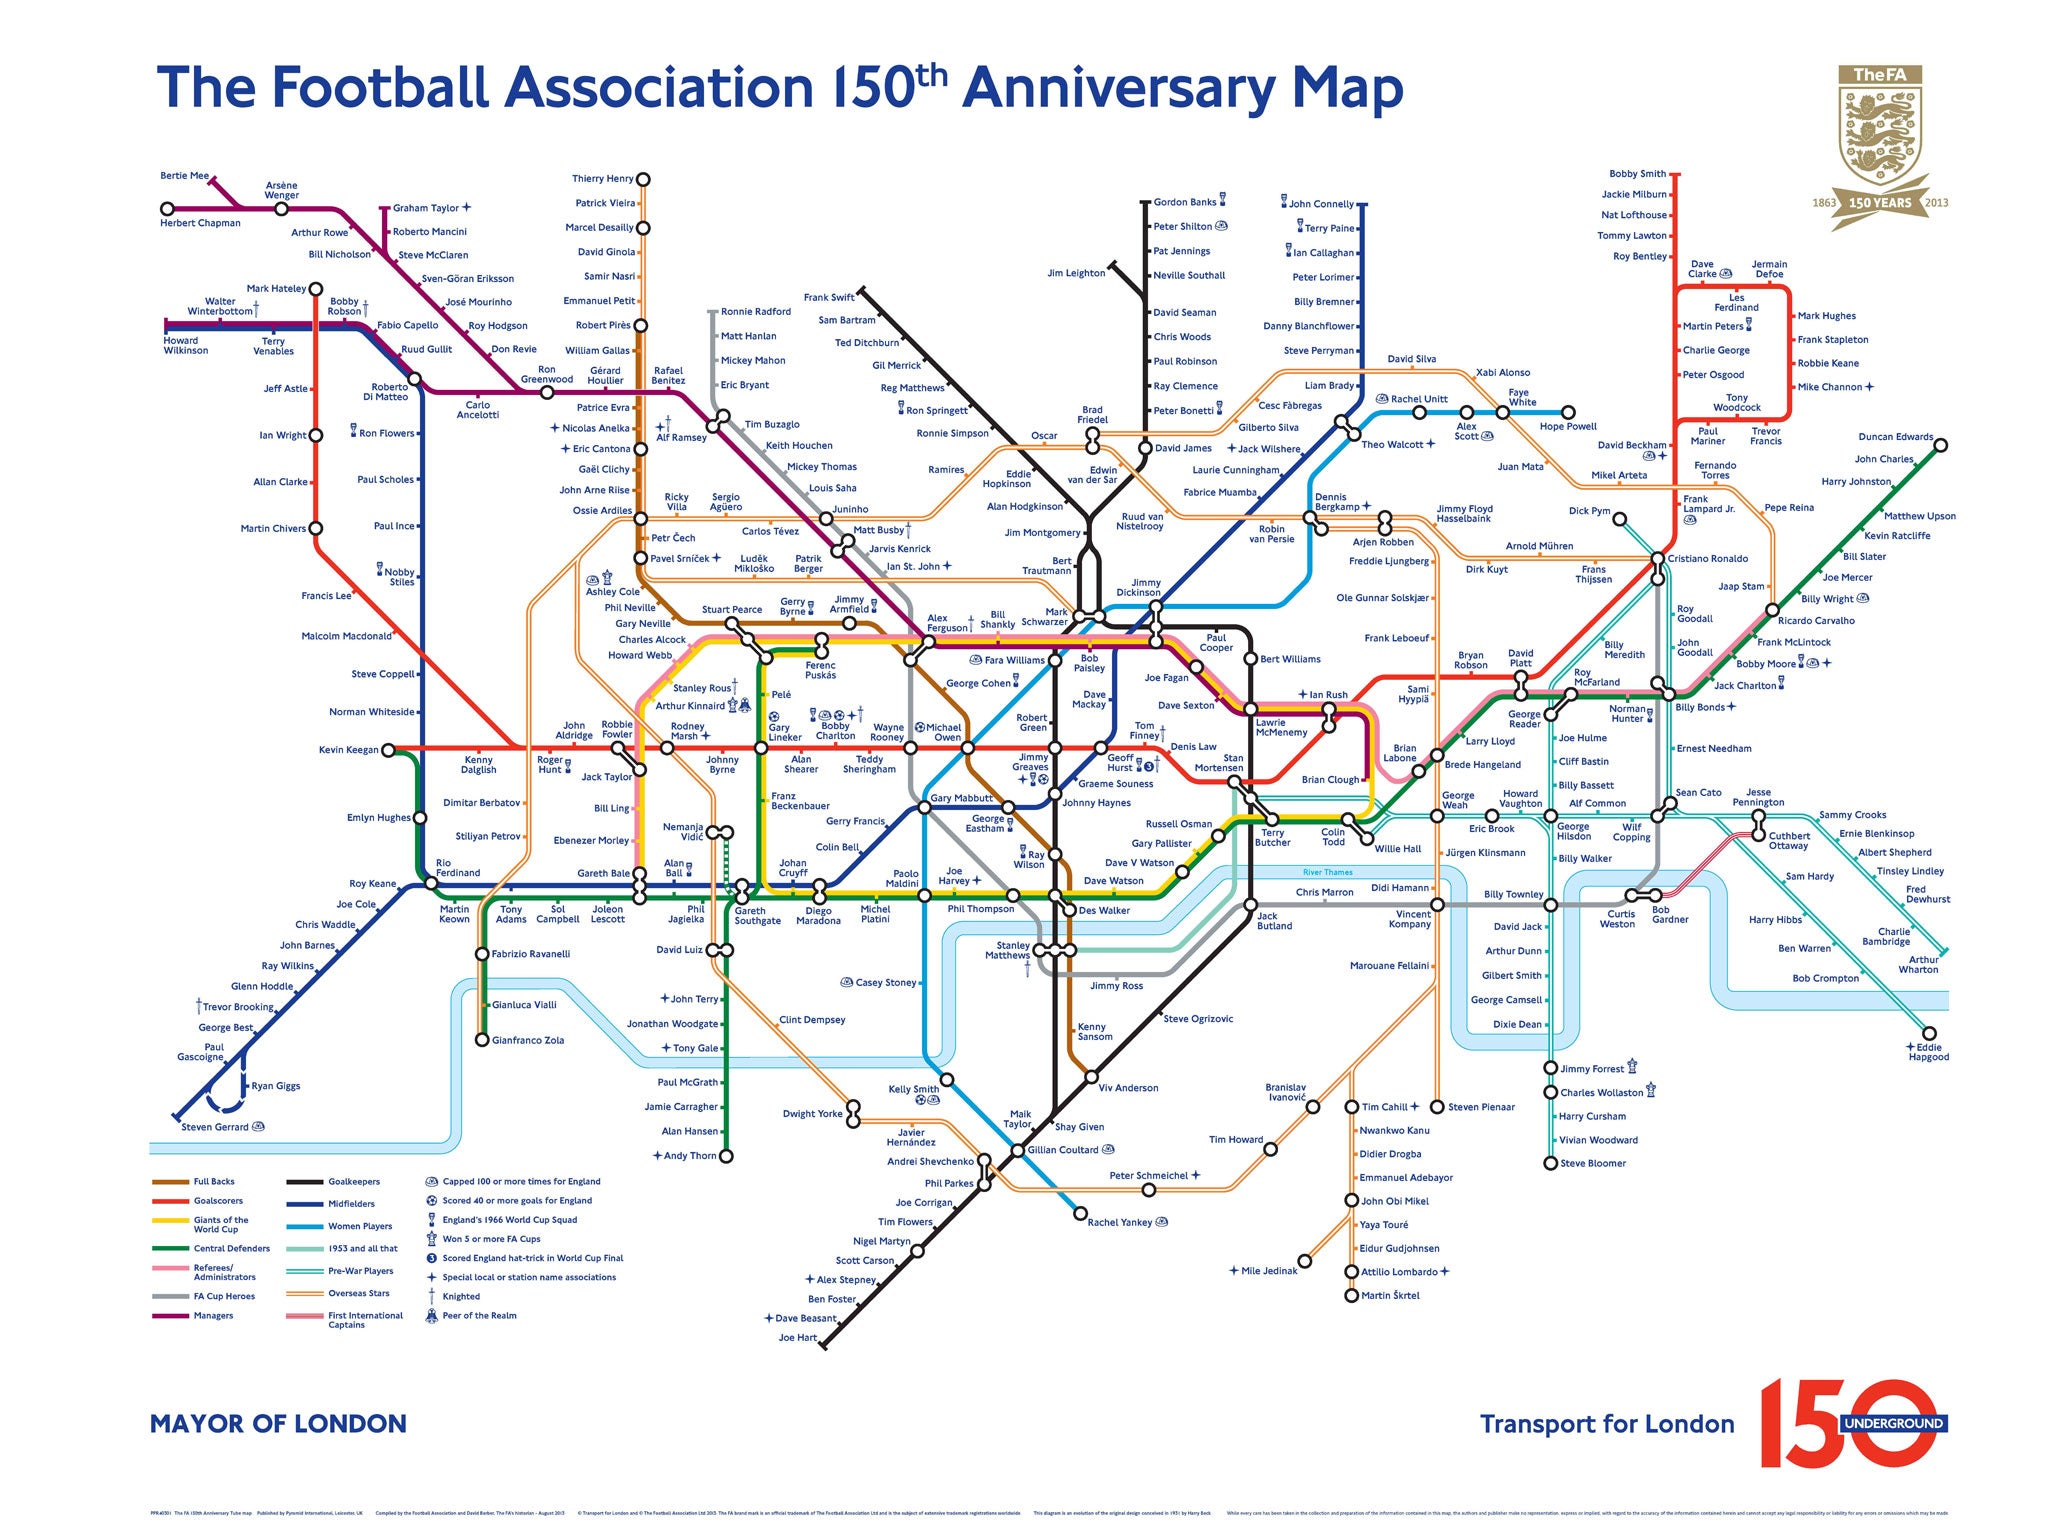 The altered Tube map to commemorate the 150th anniversary of the Football Association and the London Underground